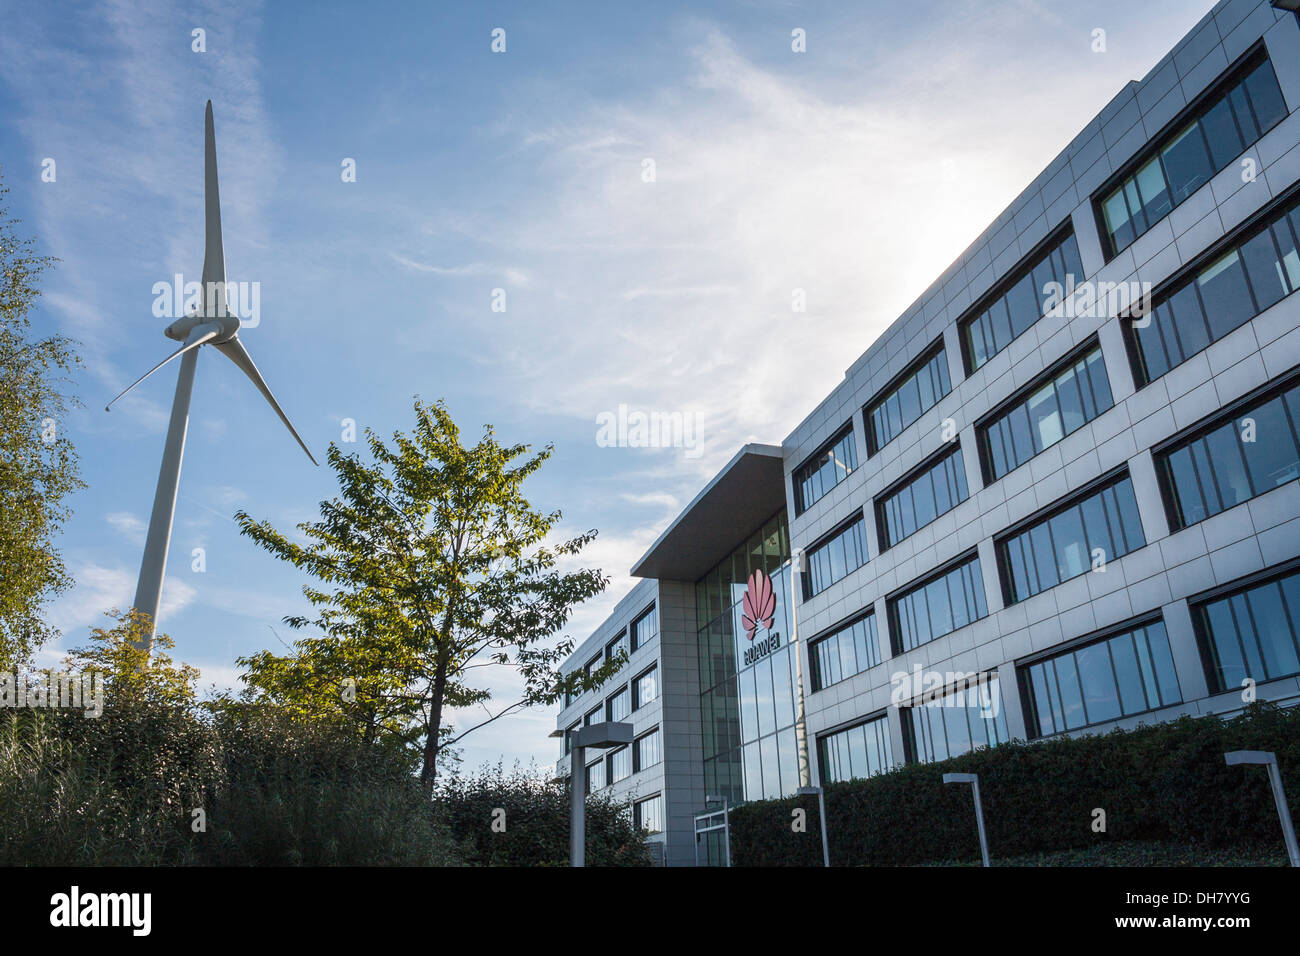 Ecotricity Wind Turbine outside the offices of Chinese mobile phone manufacturer Huawei, Reading, Berkshire, England, GB, UK. Stock Photo